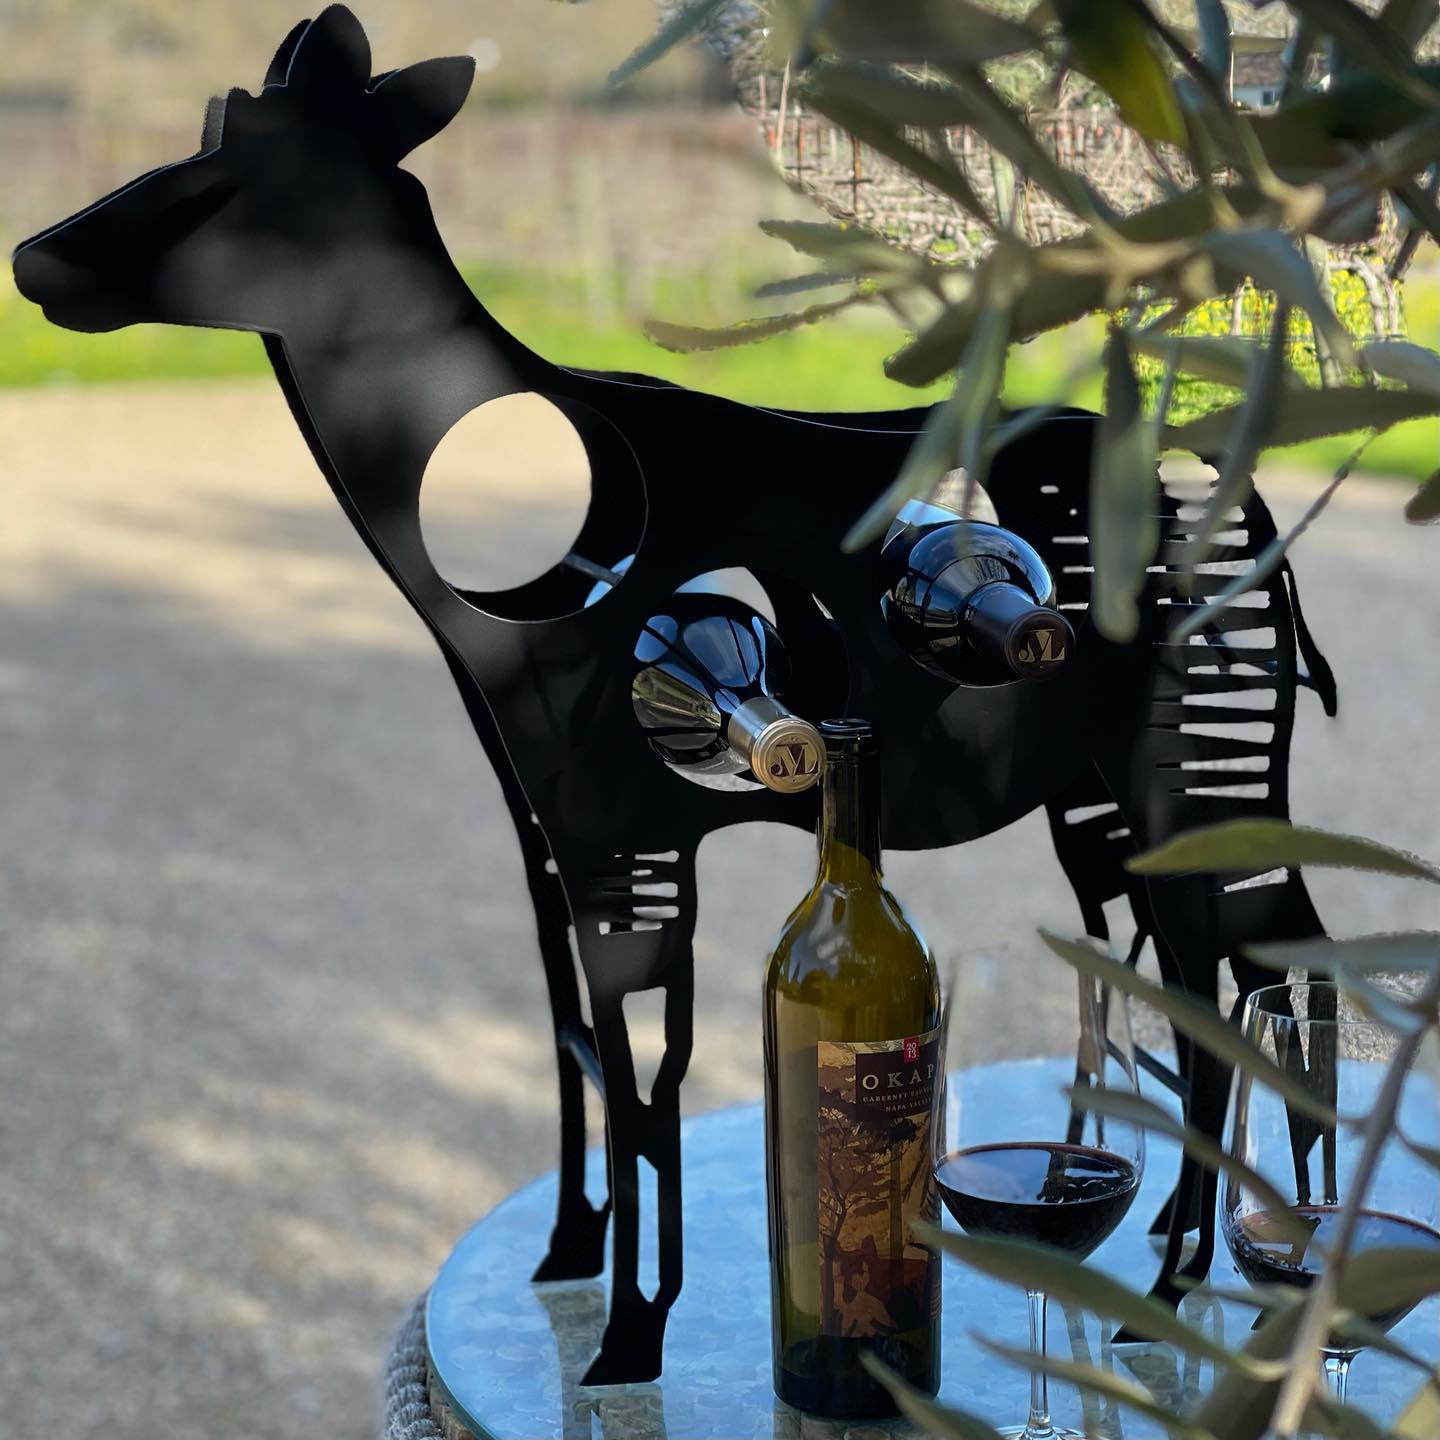 A wine holder, in the shape of an okapi, holds two bottle of wine, and another bottle is photographed on the table beside it